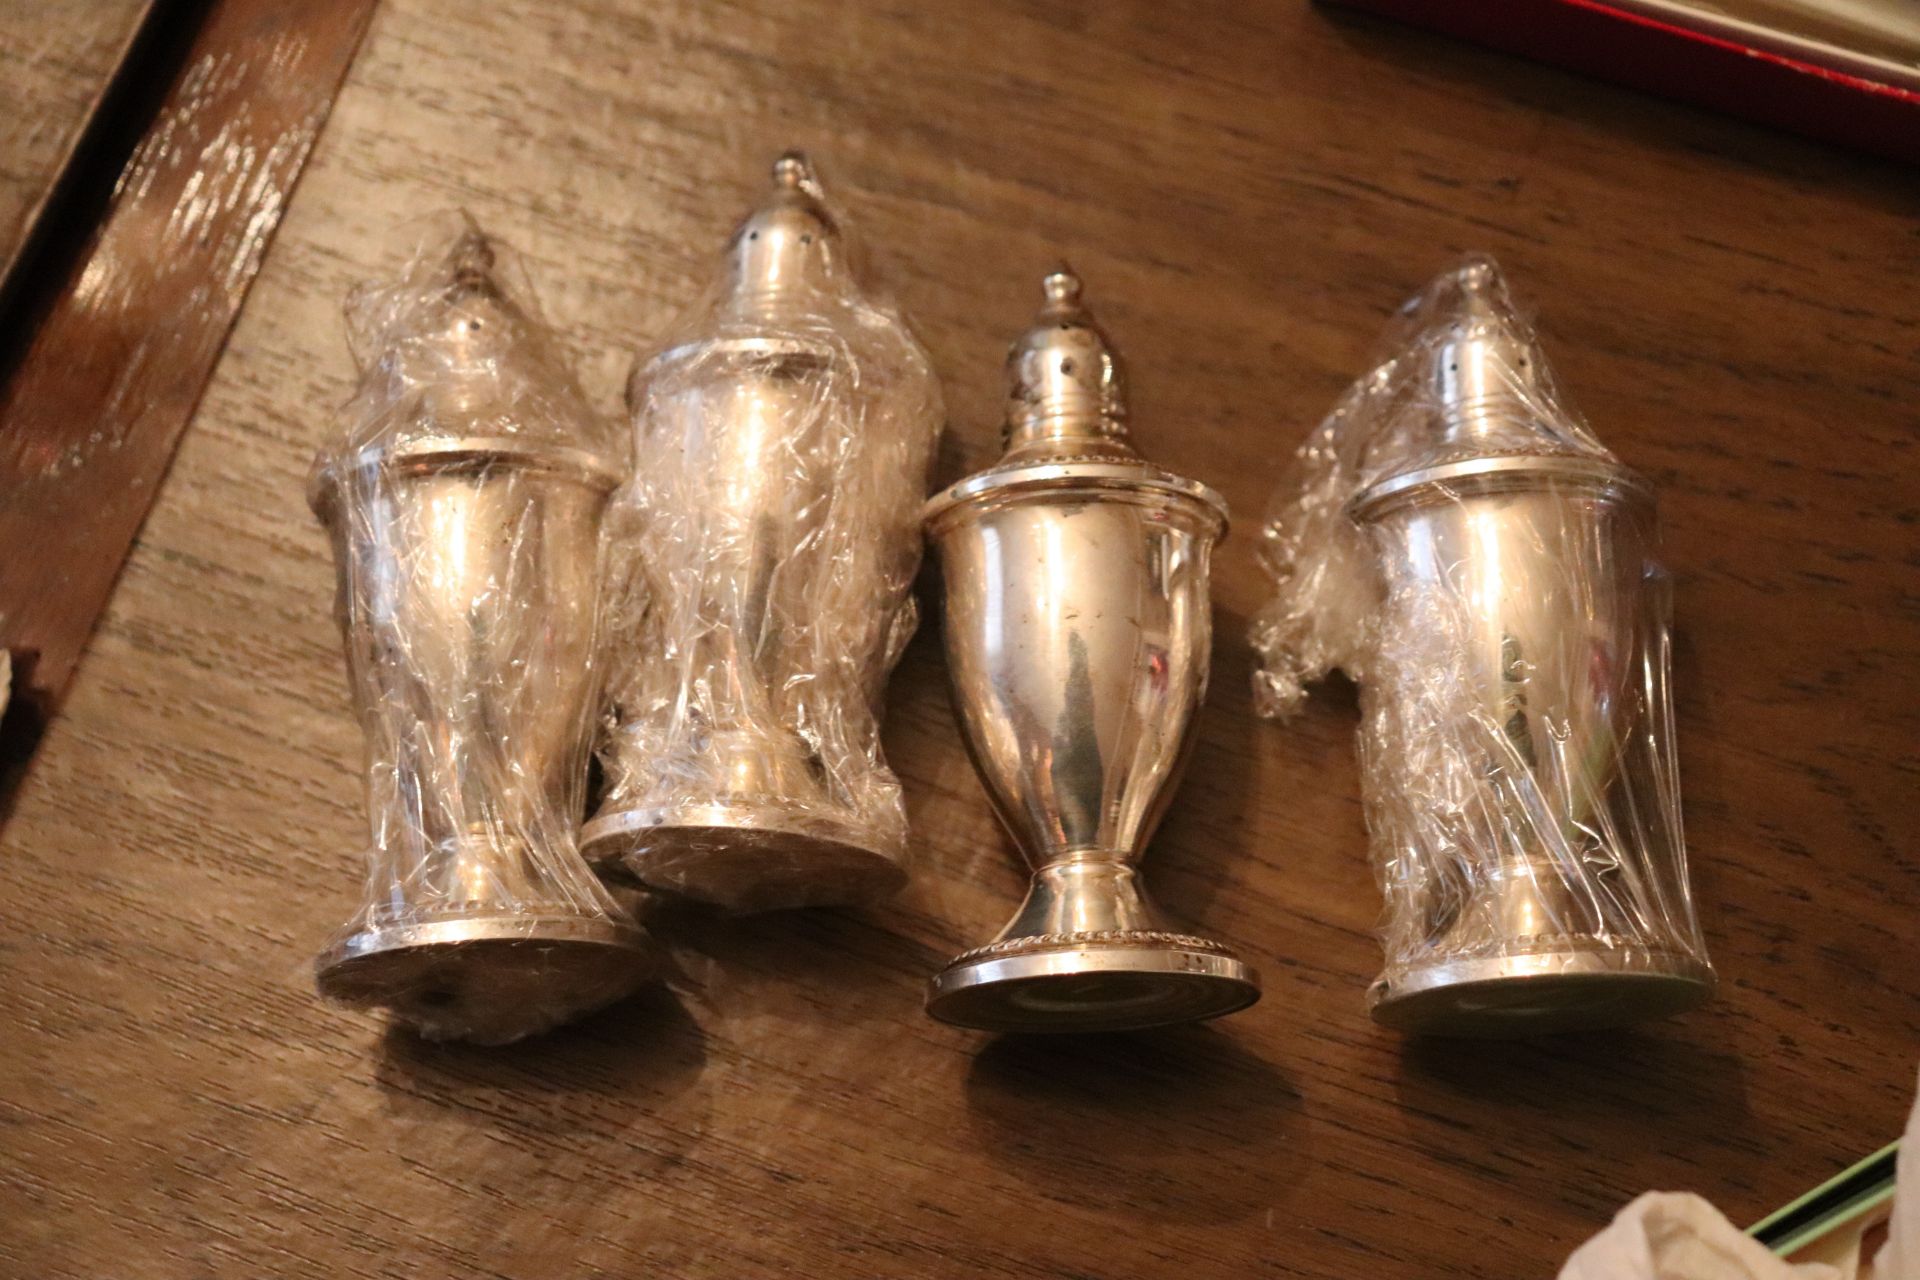 Group of weighted sterling salt and pepper shakers, approximate height 4-3/4"